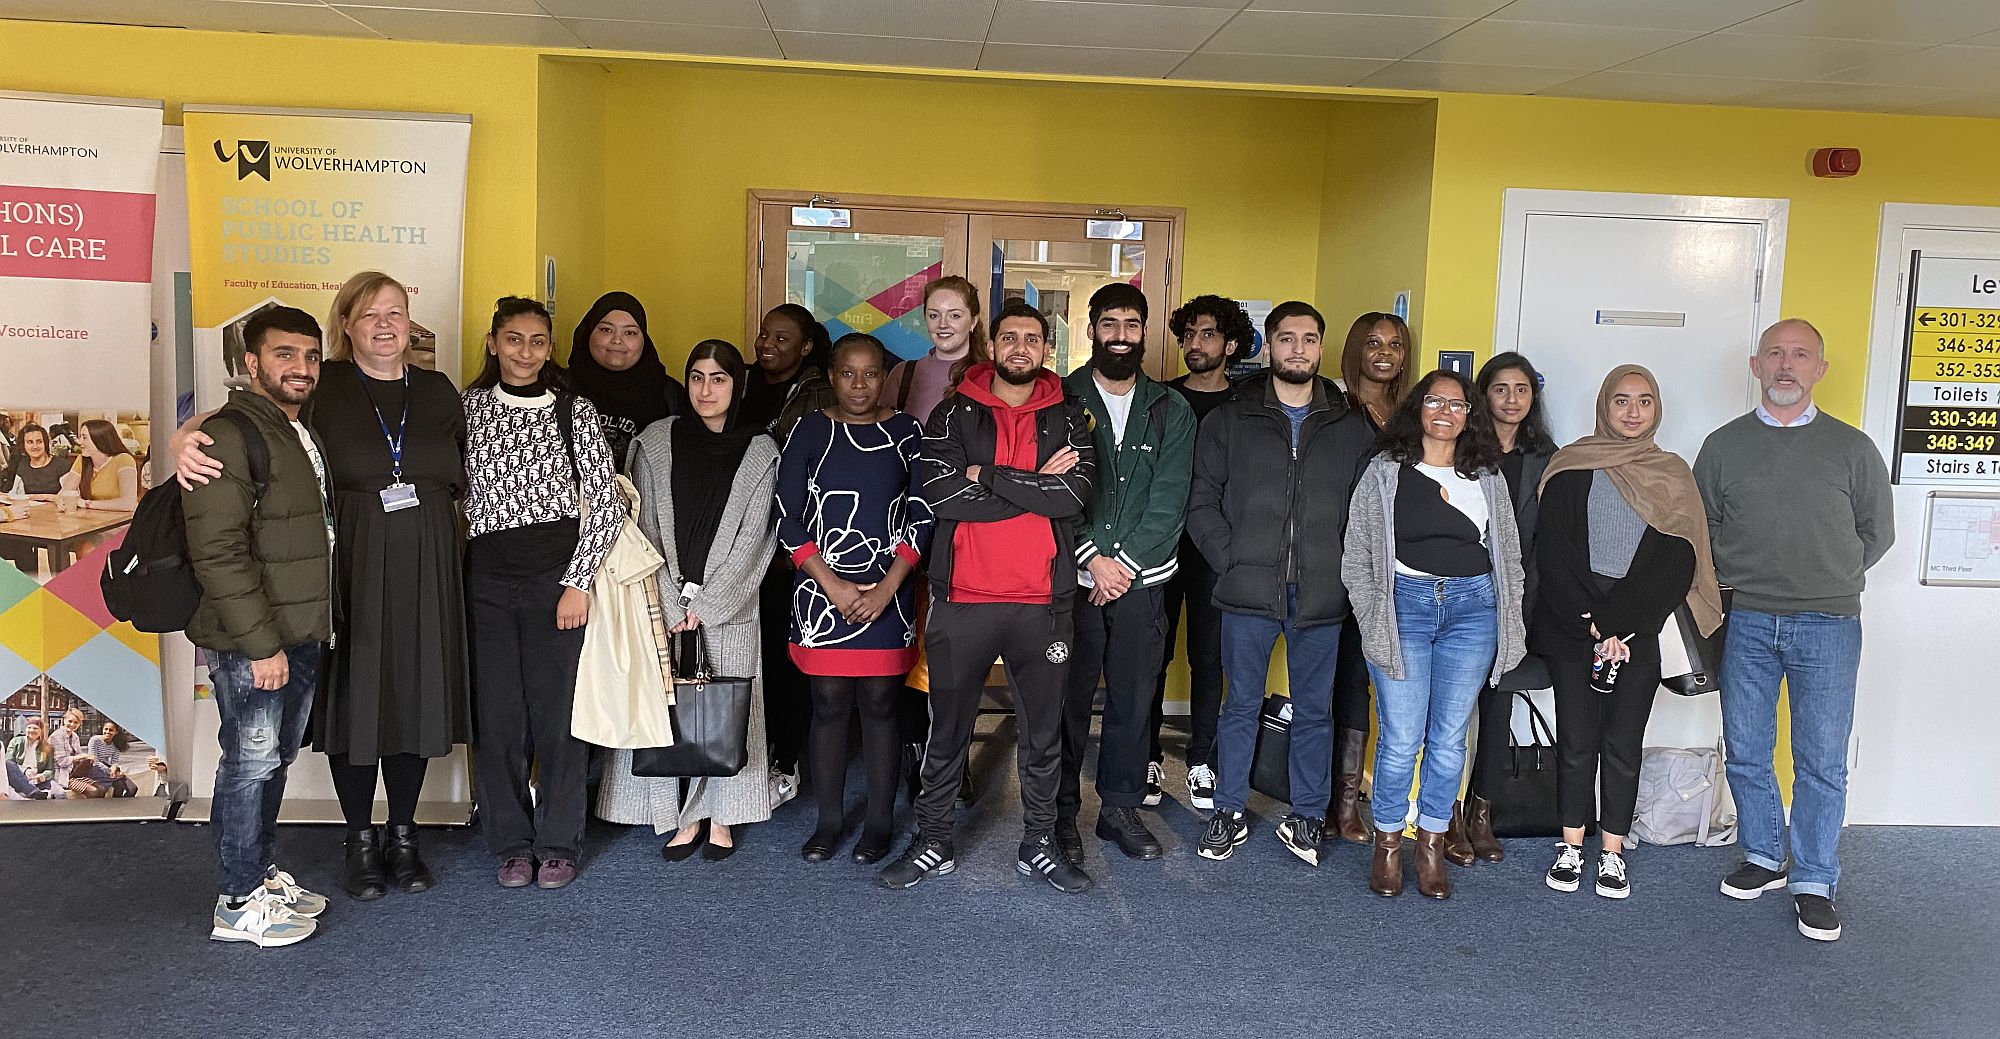 The last Physician Associate cohort at The University of Wolverhampton 2023